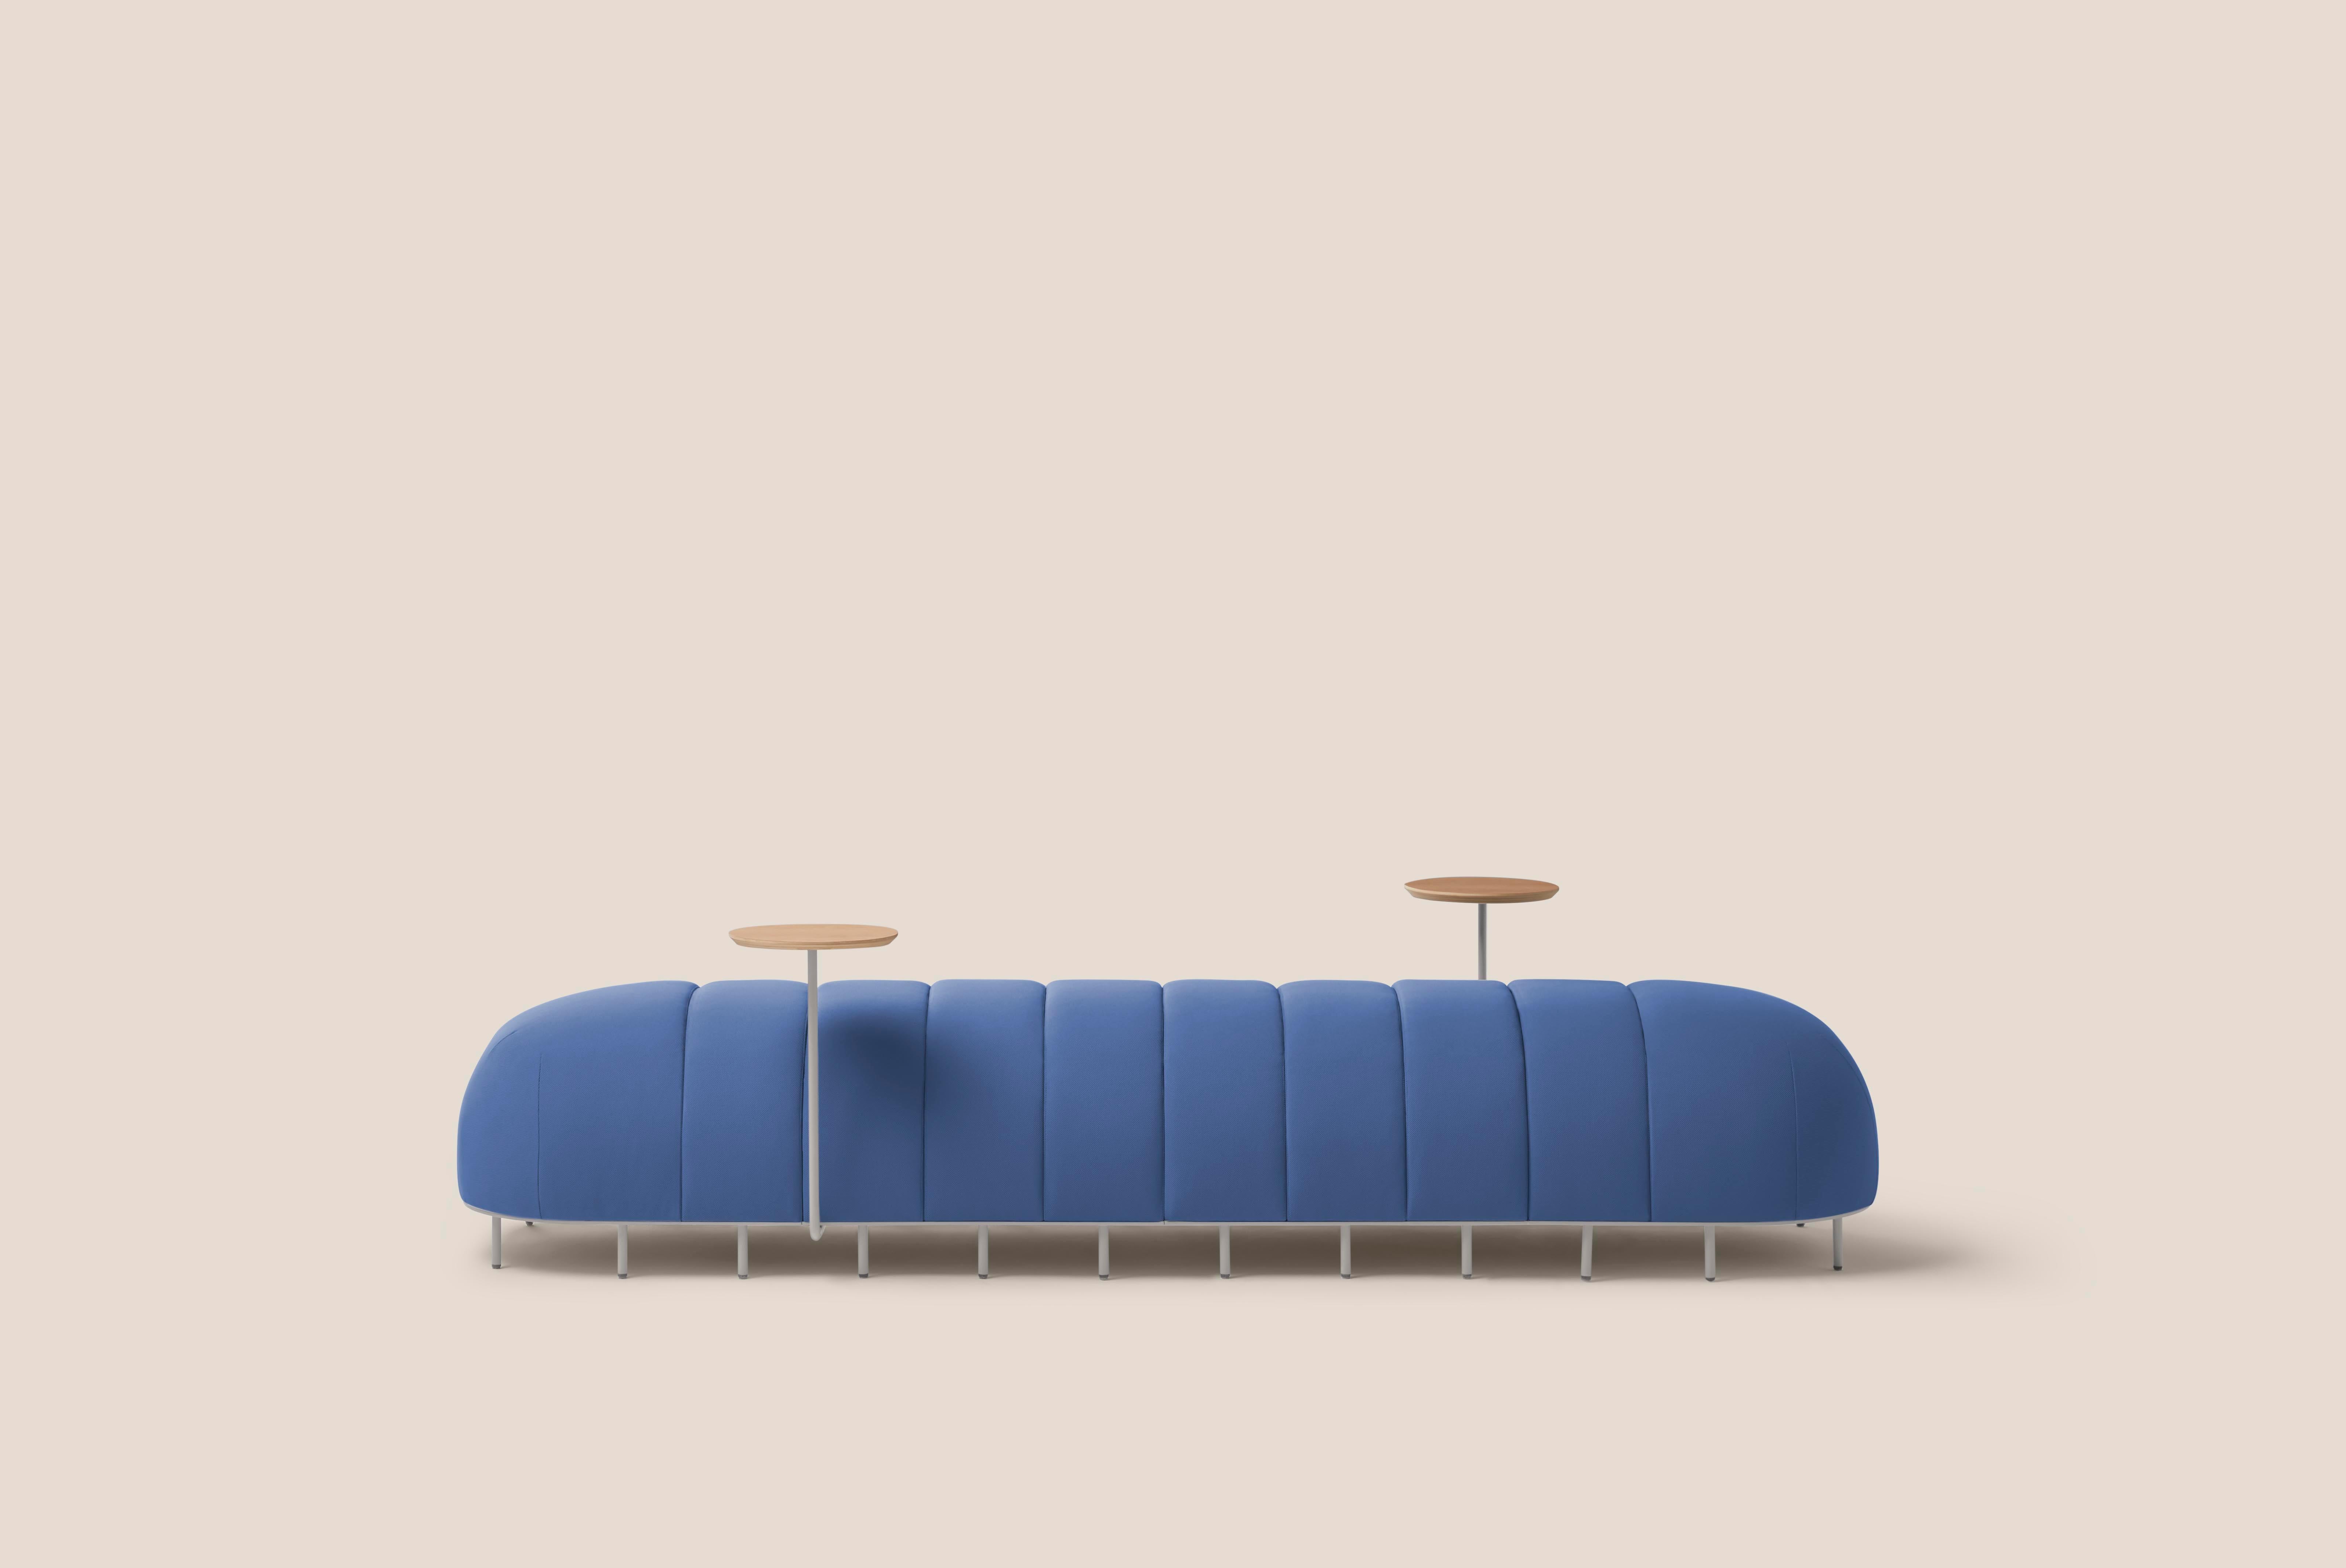 Blue worm bench VI by Pepe Albargues
Dimensions: D 65 x W 230 x H 50 cm
Materials: Plywood, foam CMHR, iron
Available in different colors. Custom modules convinations available

2 x straight module
2 x end module
2 x side table

Worm is an